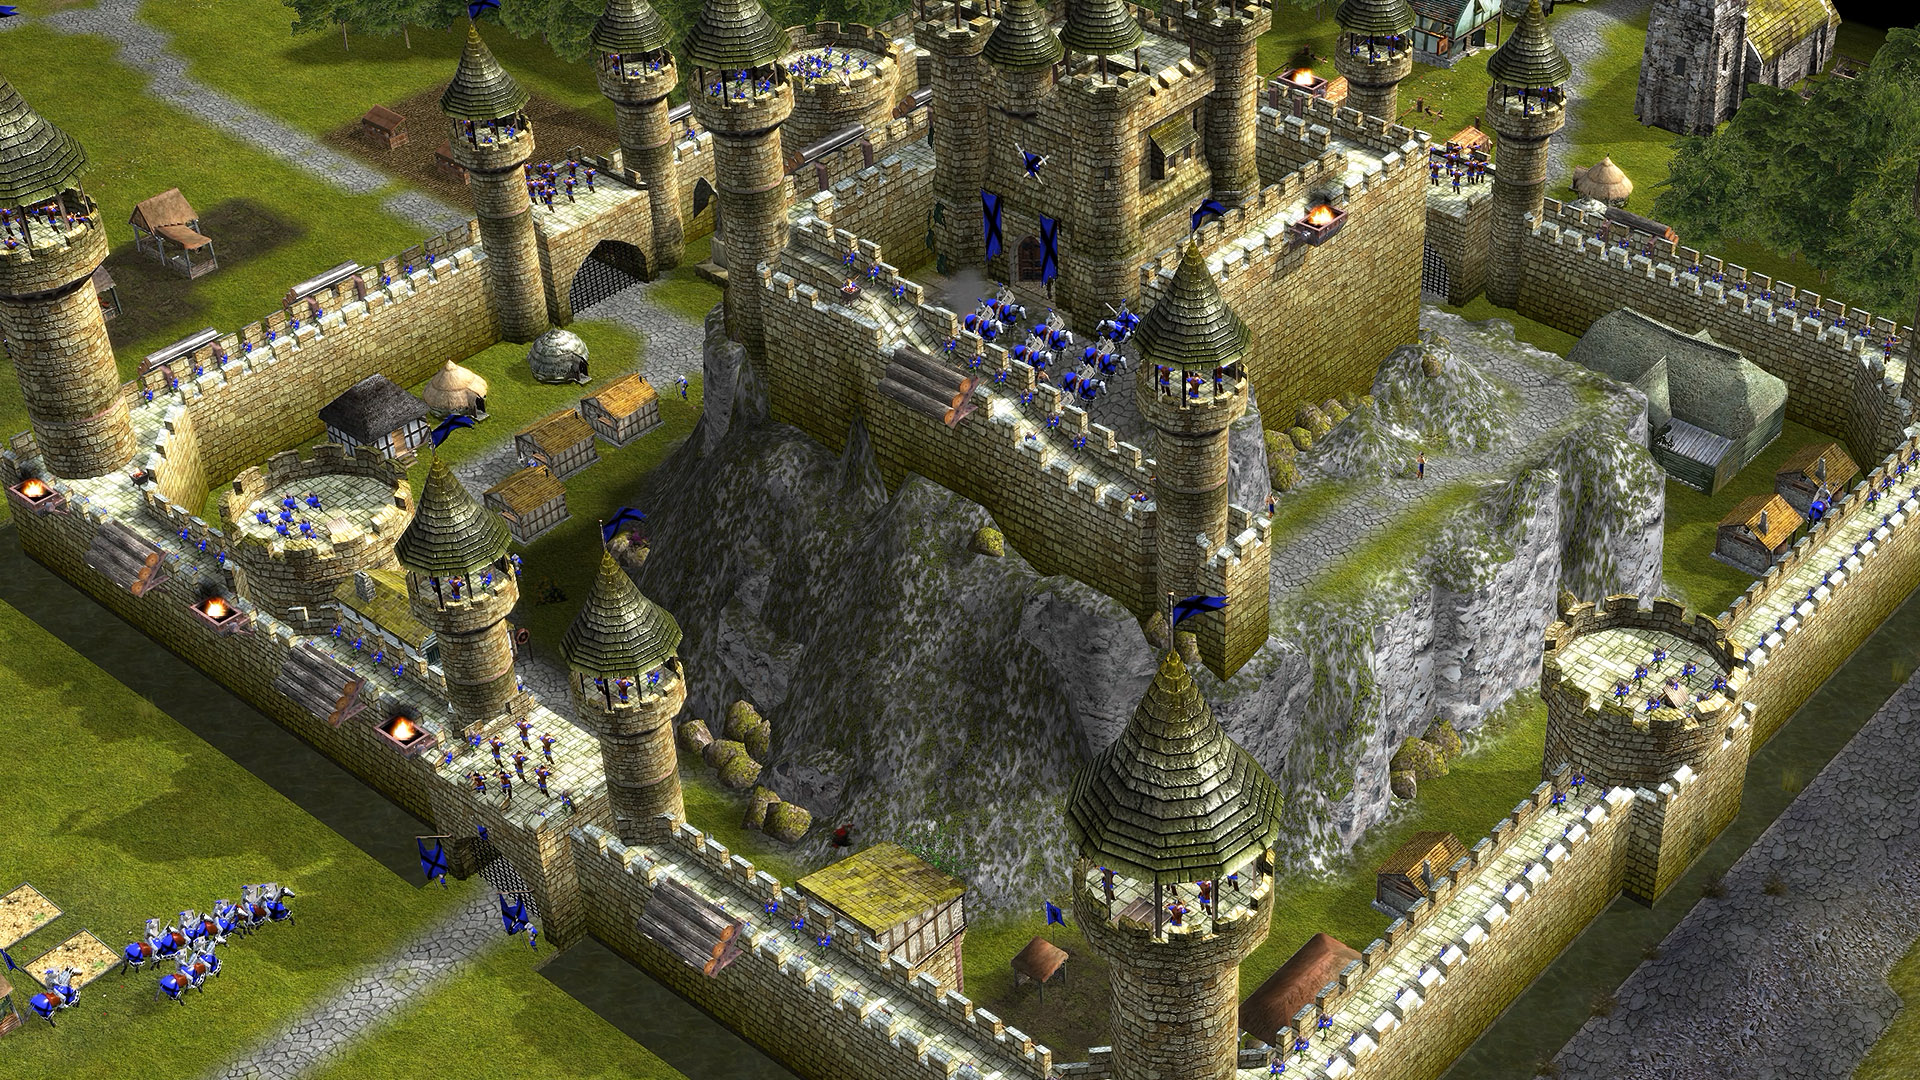 stronghold legends for pc